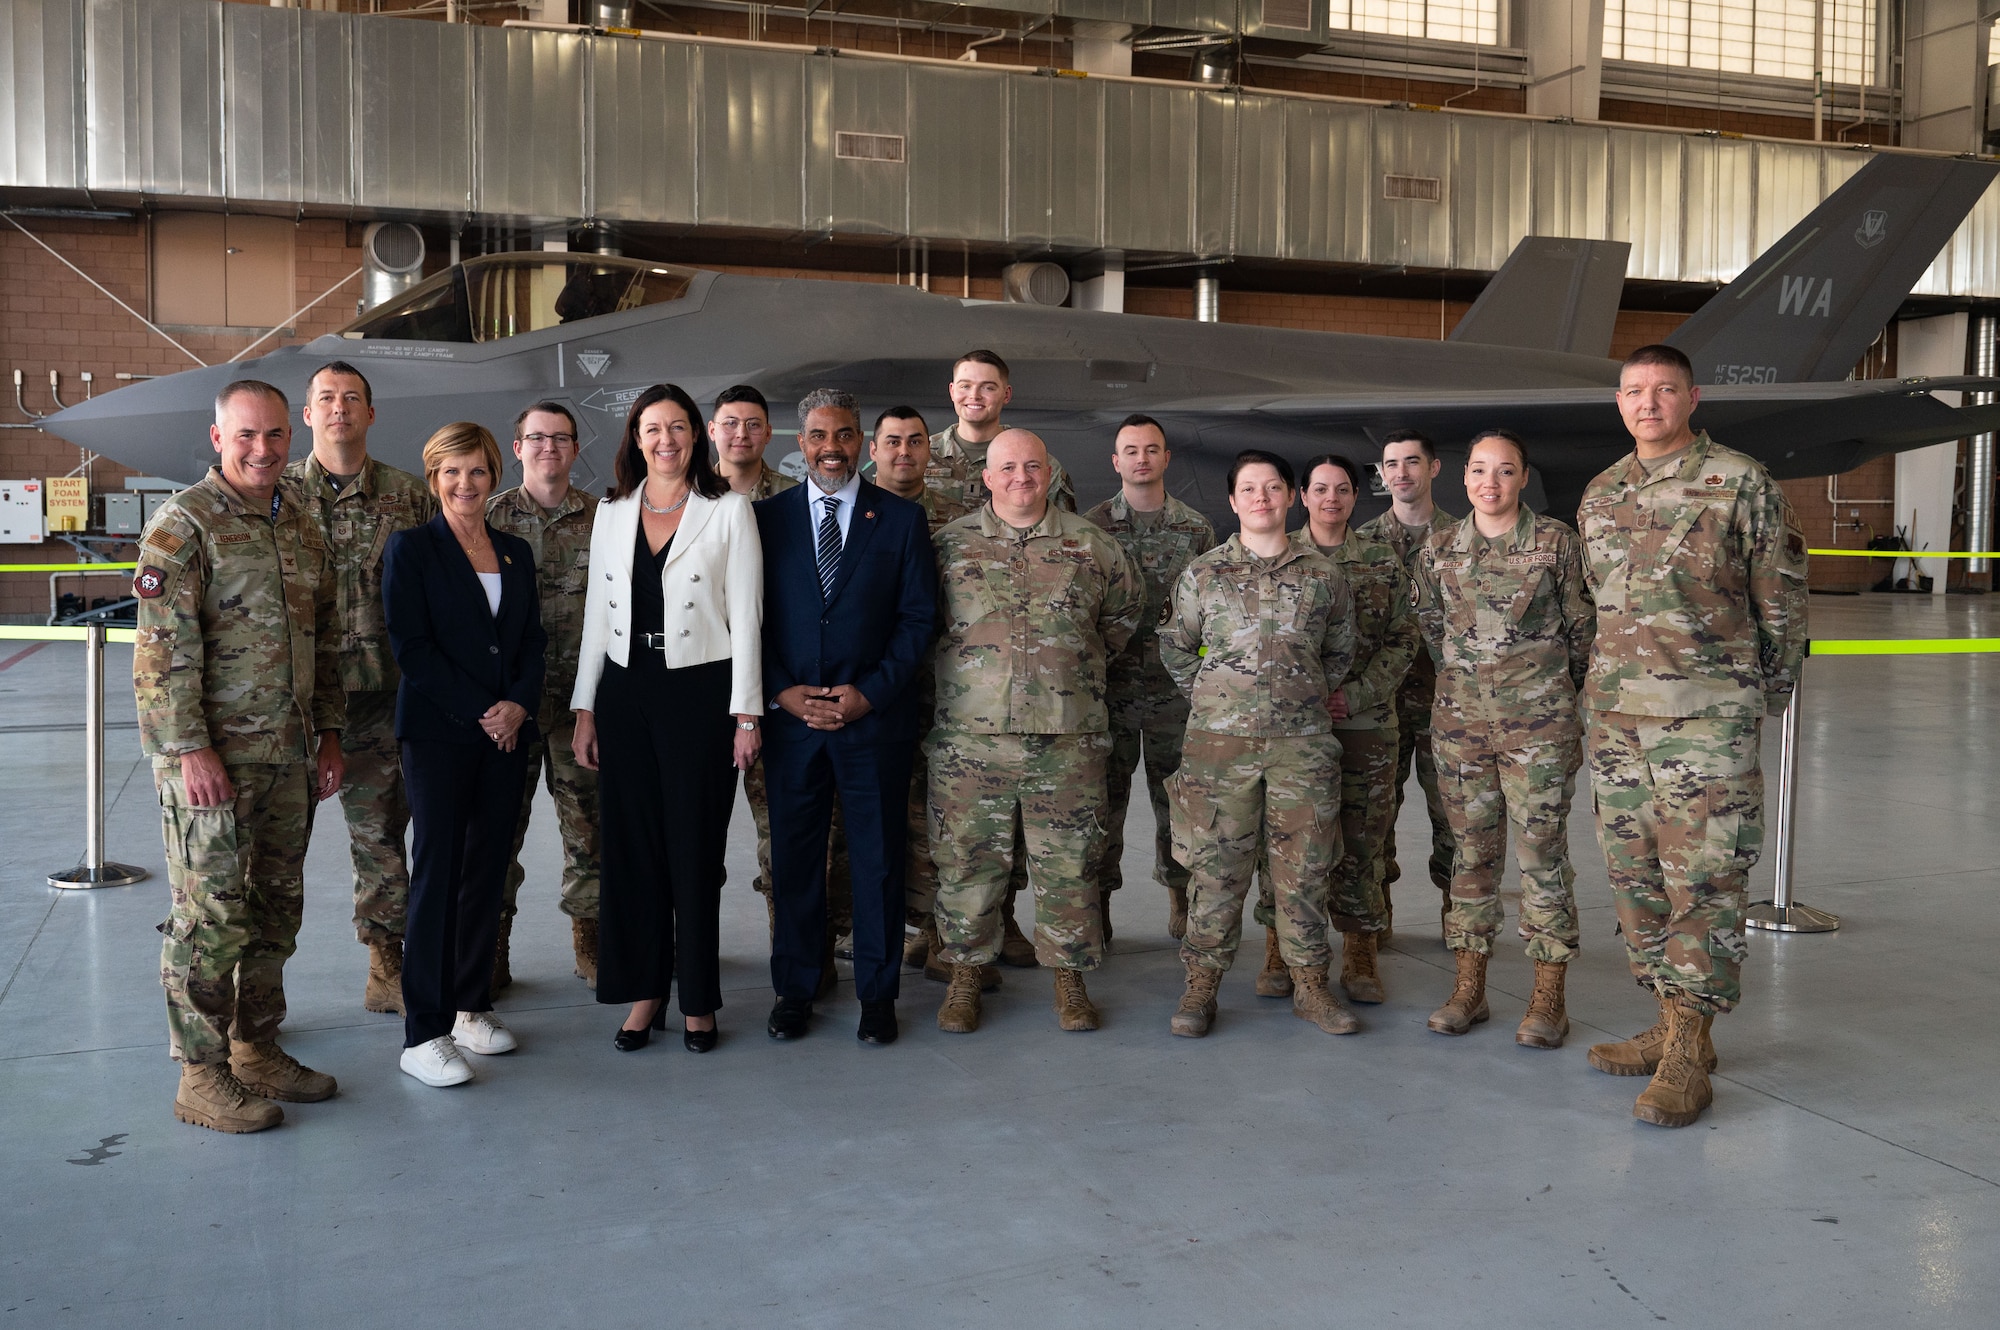 The Hon. Kristyn Jones, assistant secretary of the Air Force for Financial Management and Comptroller, performing the duties of under secretary of the Air Force, Congress members and Airmen pose for a group photo during a tour at Nellis Air Force Base, April 7, 2023.